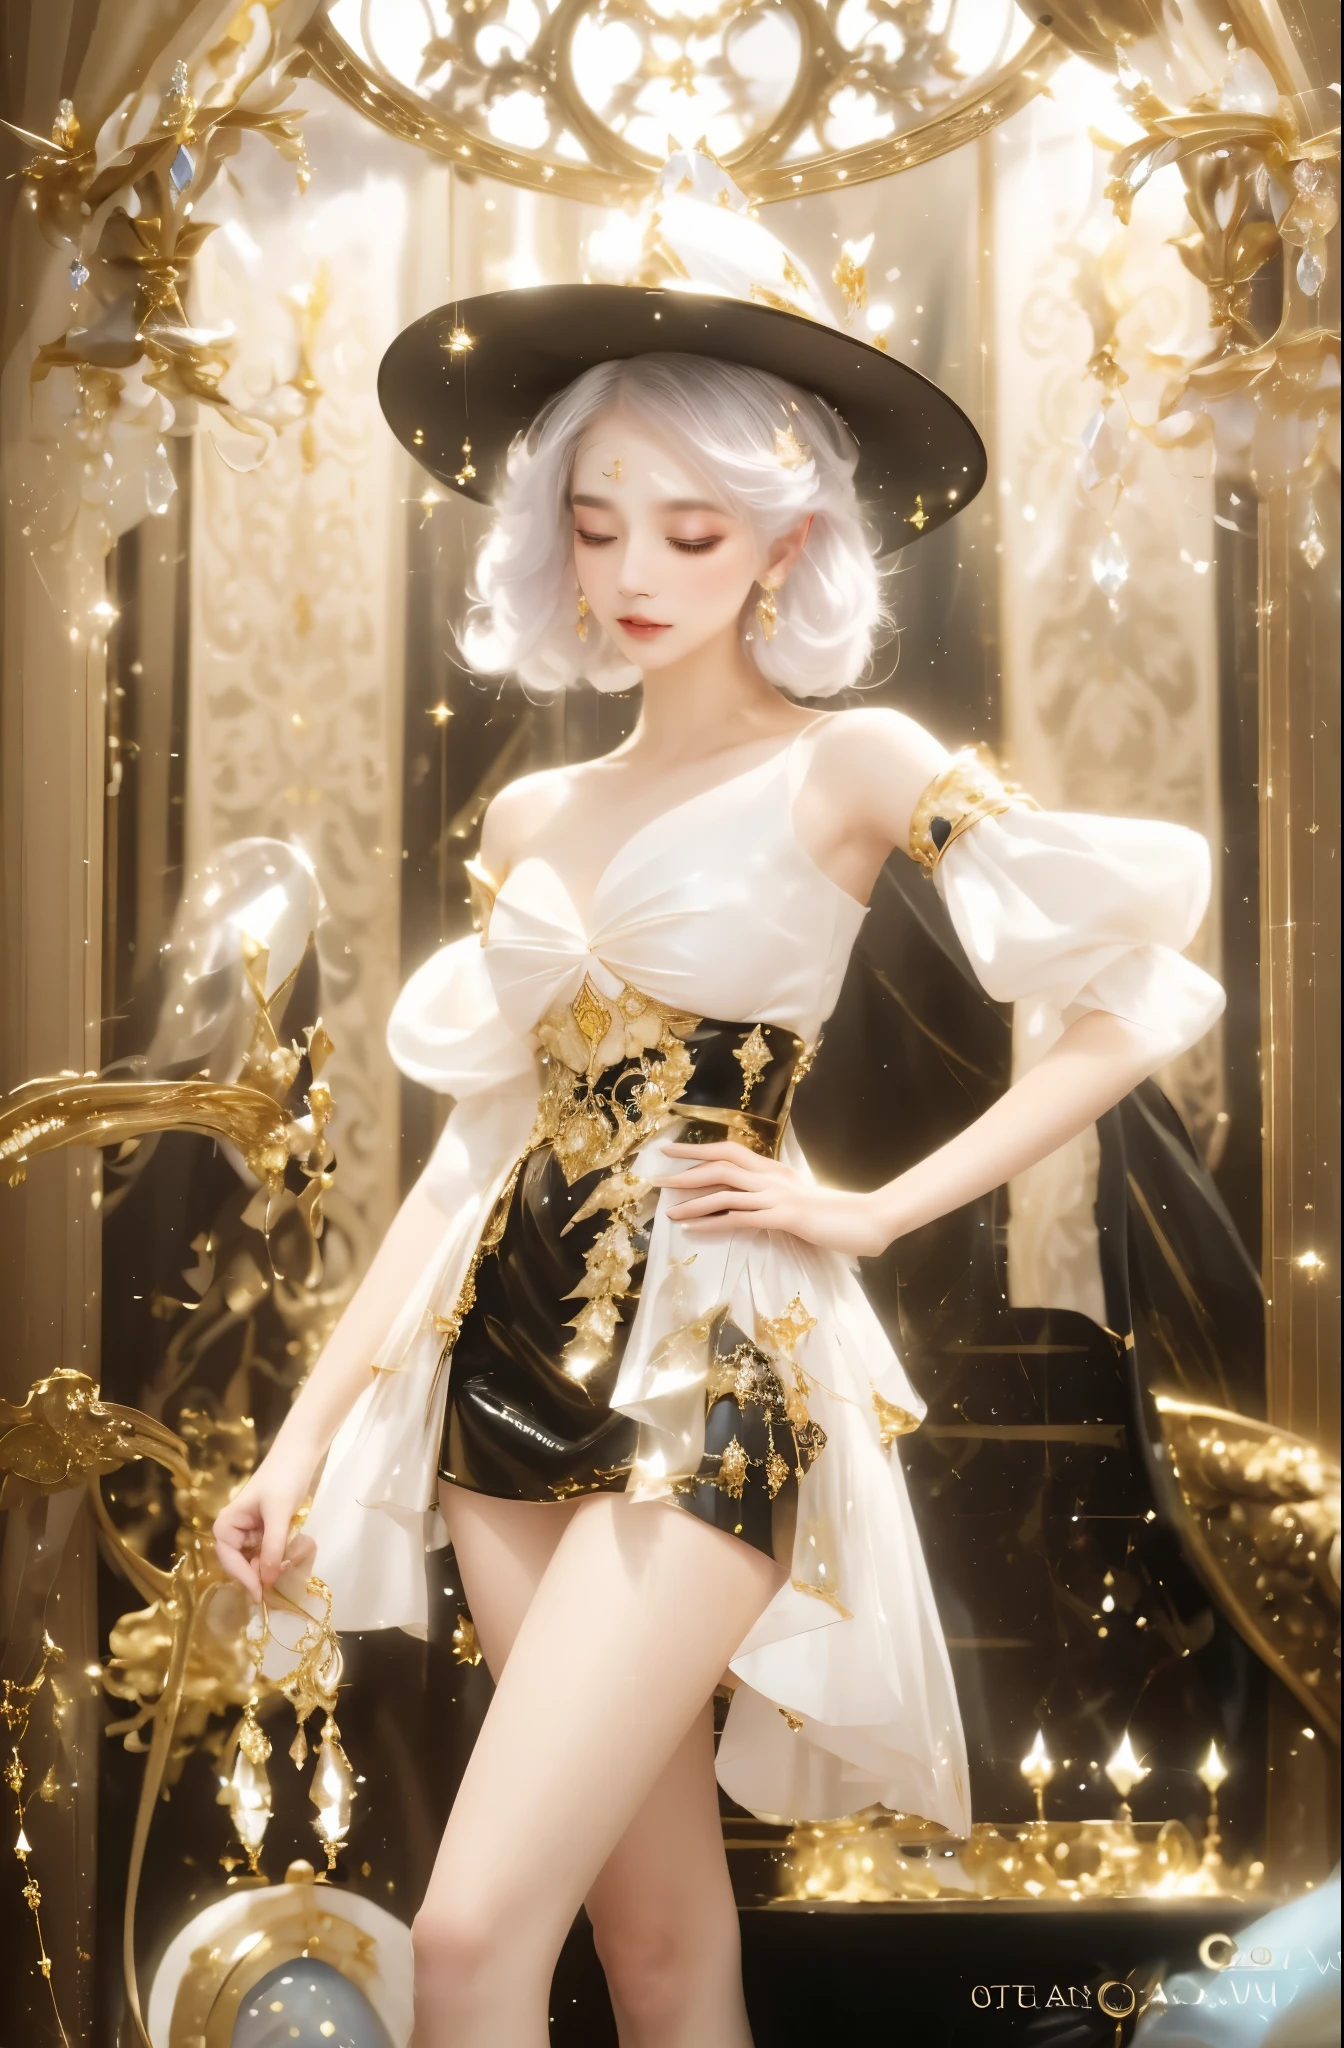 real person，Close-up of a woman wearing a skirt and hat, fantasy costumes, Dress up in dreamy formal attire, Fantasy style clothing, Moon themed clothing, beautiful fantasy queen, Popular topics on cgstation, gold plated clothing, ethereal fantasy, ((beautiful fantasy queen)), Astral Witch Clothes, Imperial royal elegant clothing, rococo cyberpunk, intricate clothing, clear outfit design